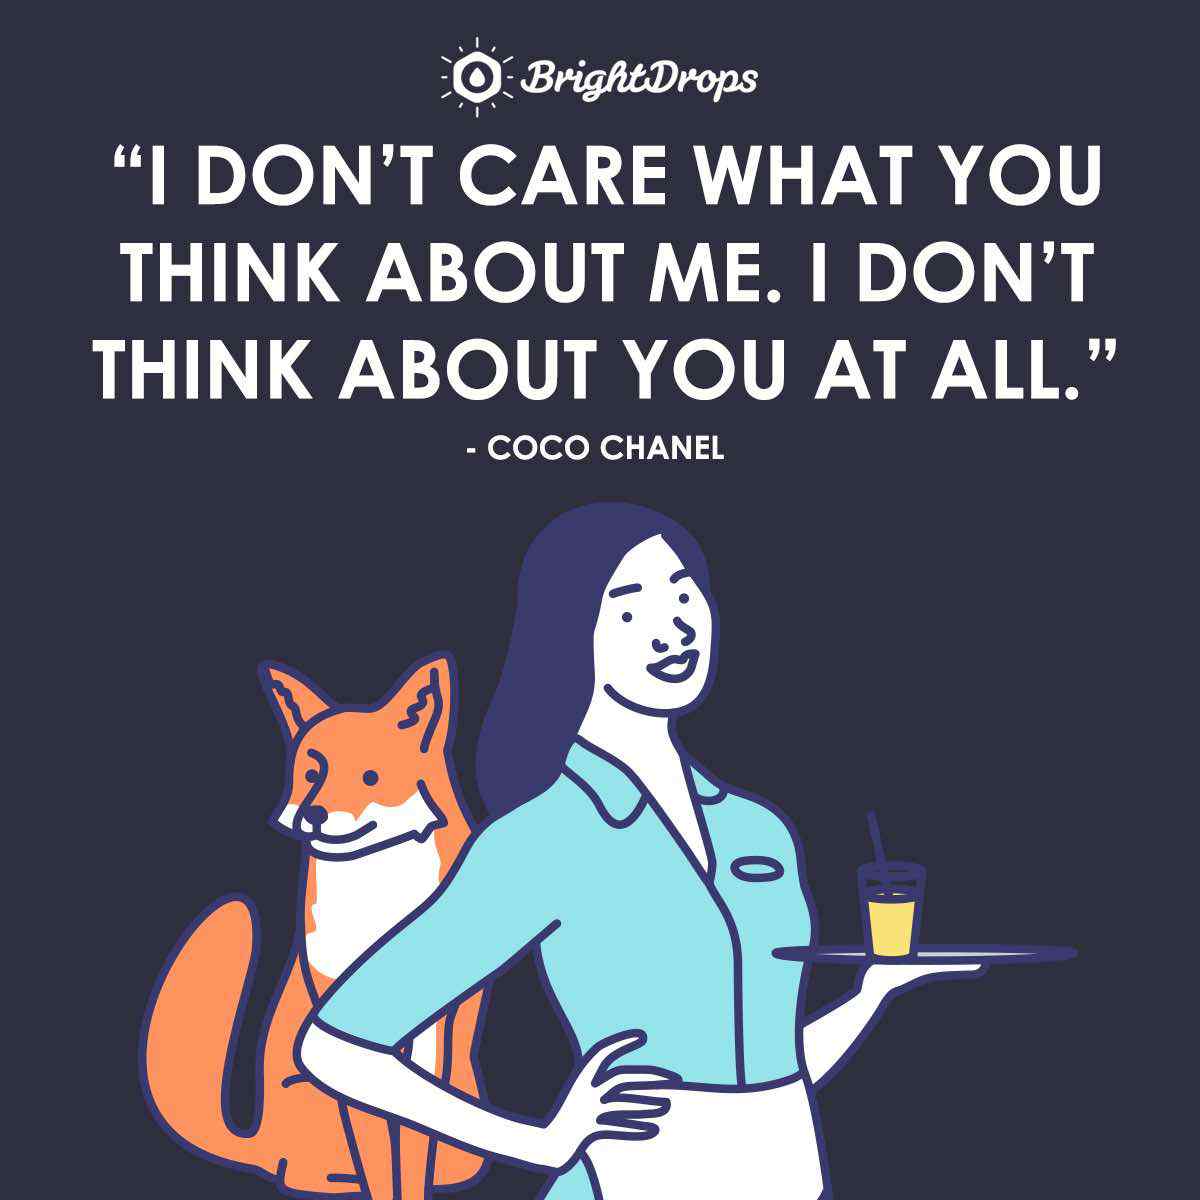 “I don't care what you think about me. I don't think about you at all.” ~ Coco Chanel